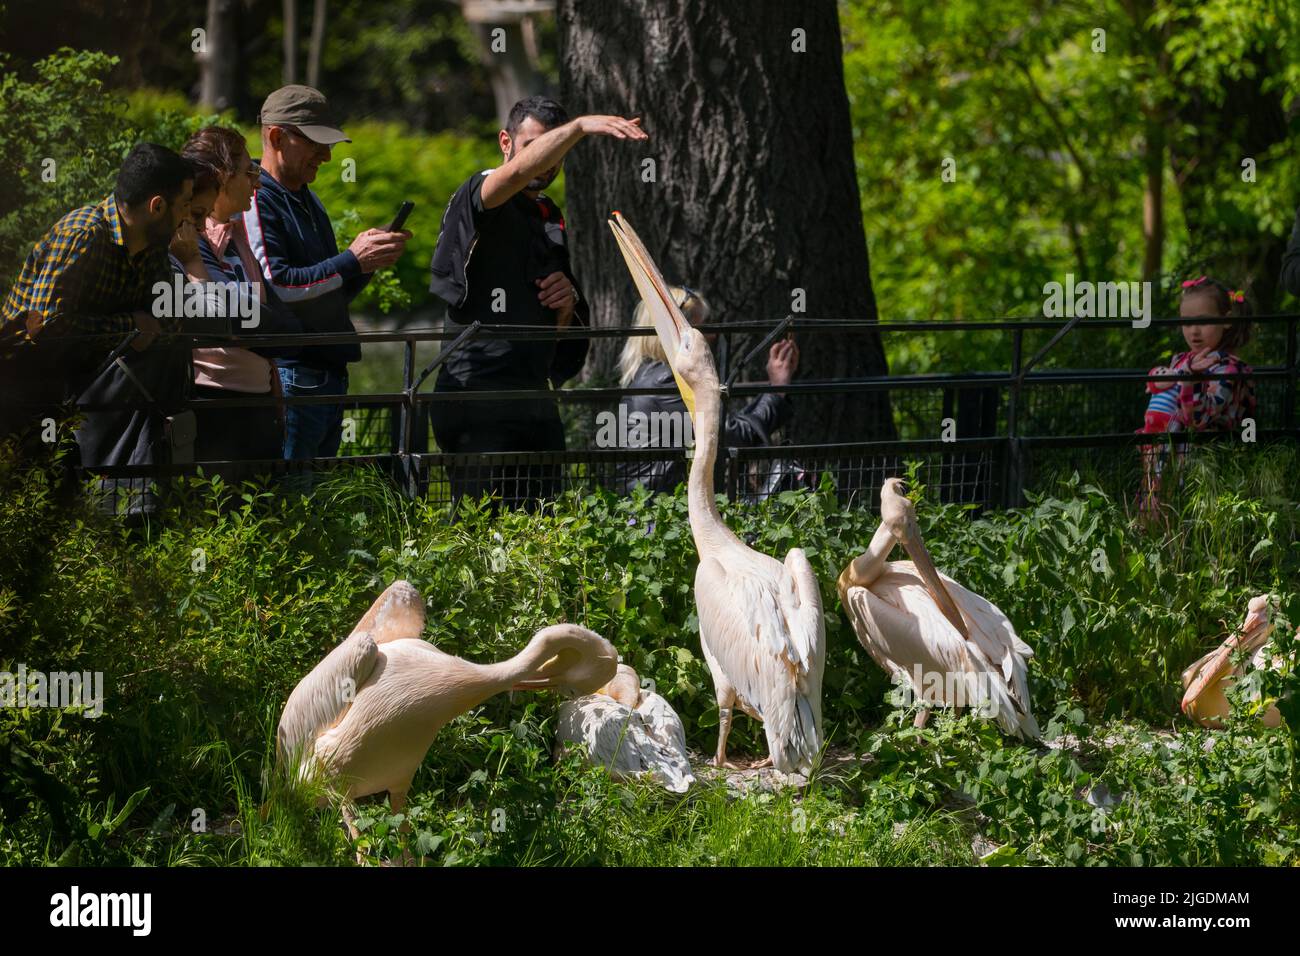 Warsaw, Poland, people observe Eastern White Pelicans (Pelecanus onocrotalus) at birds enclosure in Warsaw Zoological Garden. Stock Photo